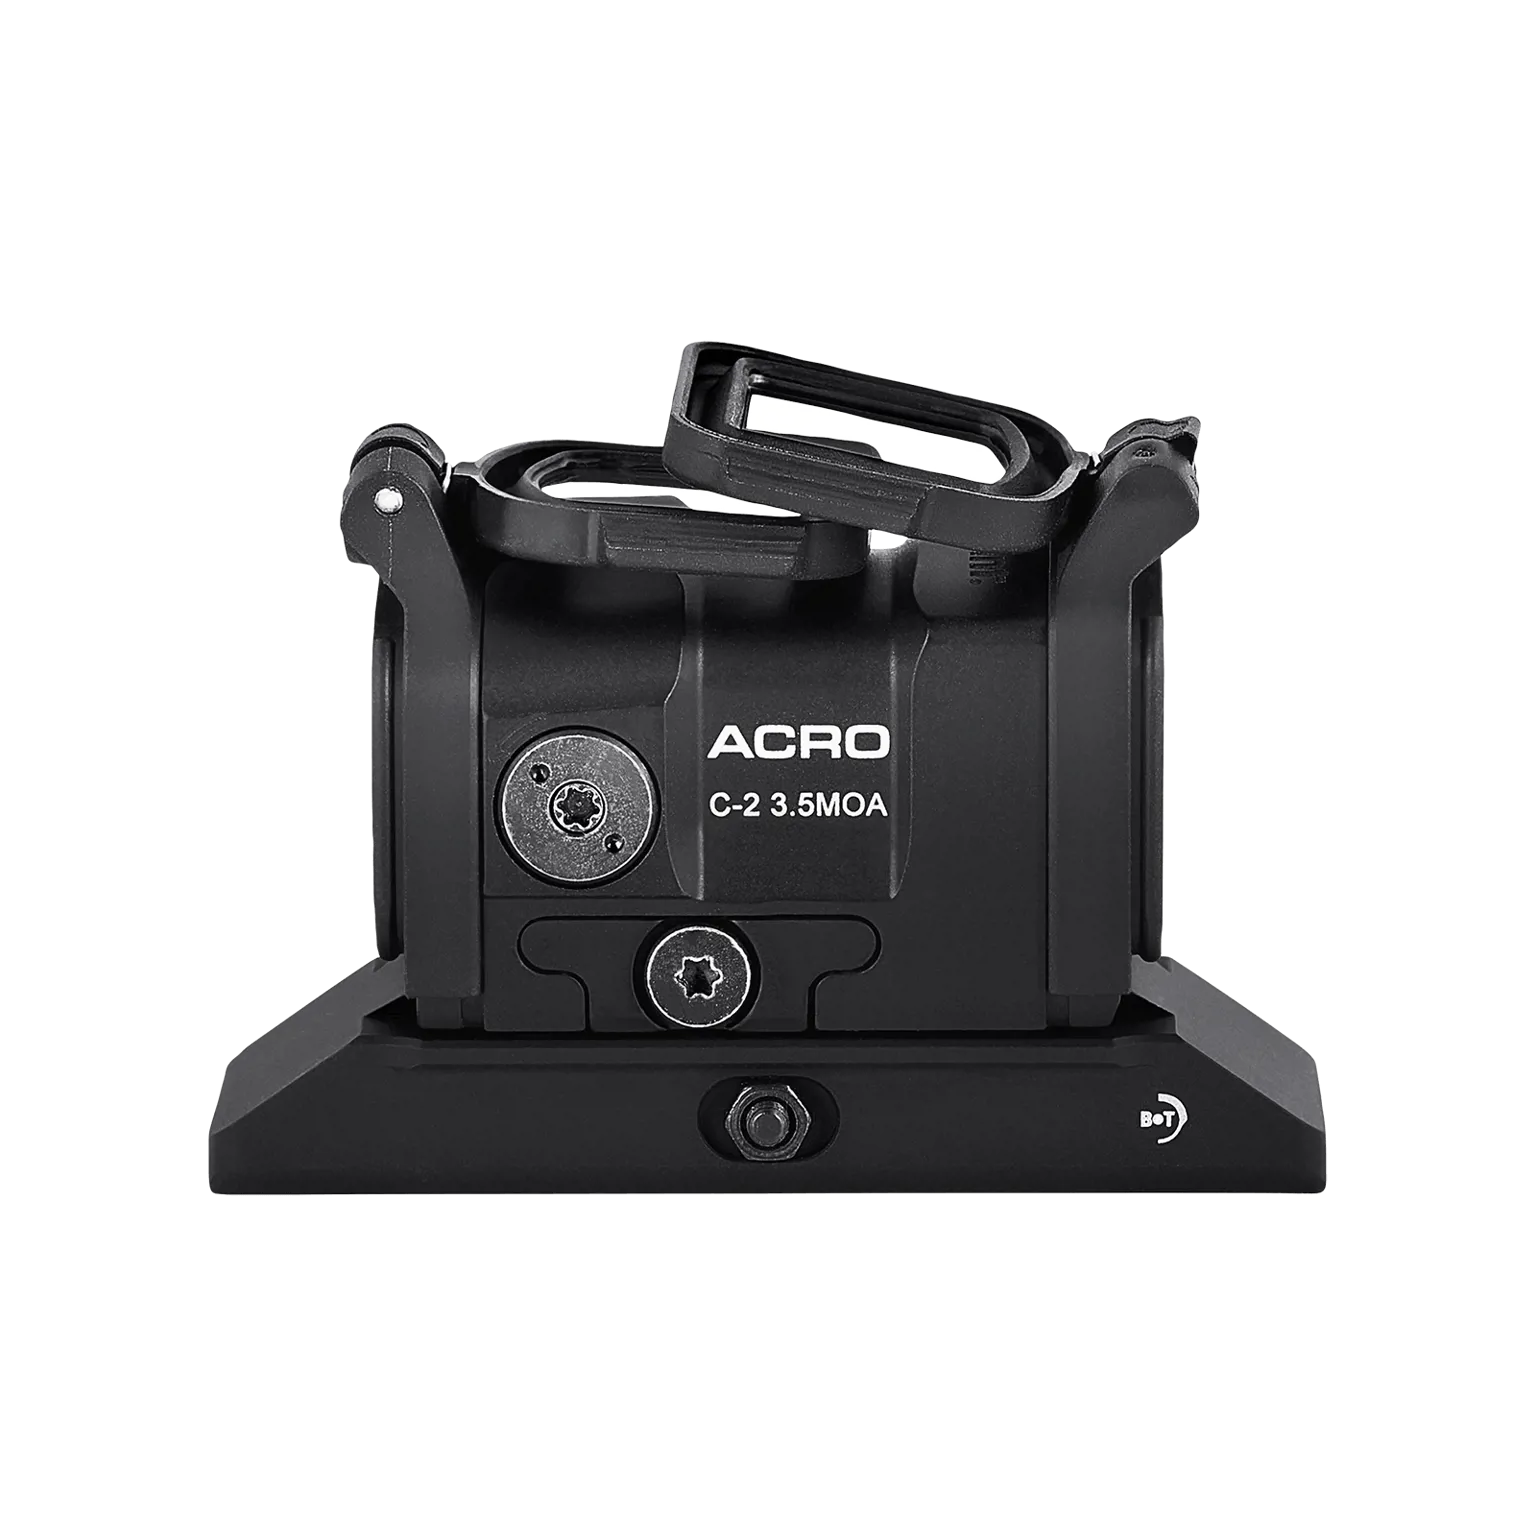 Acro C-2™ 3.5 MOA - Red dot reflex sight with QD mount for Tikka T3/T3x - 6